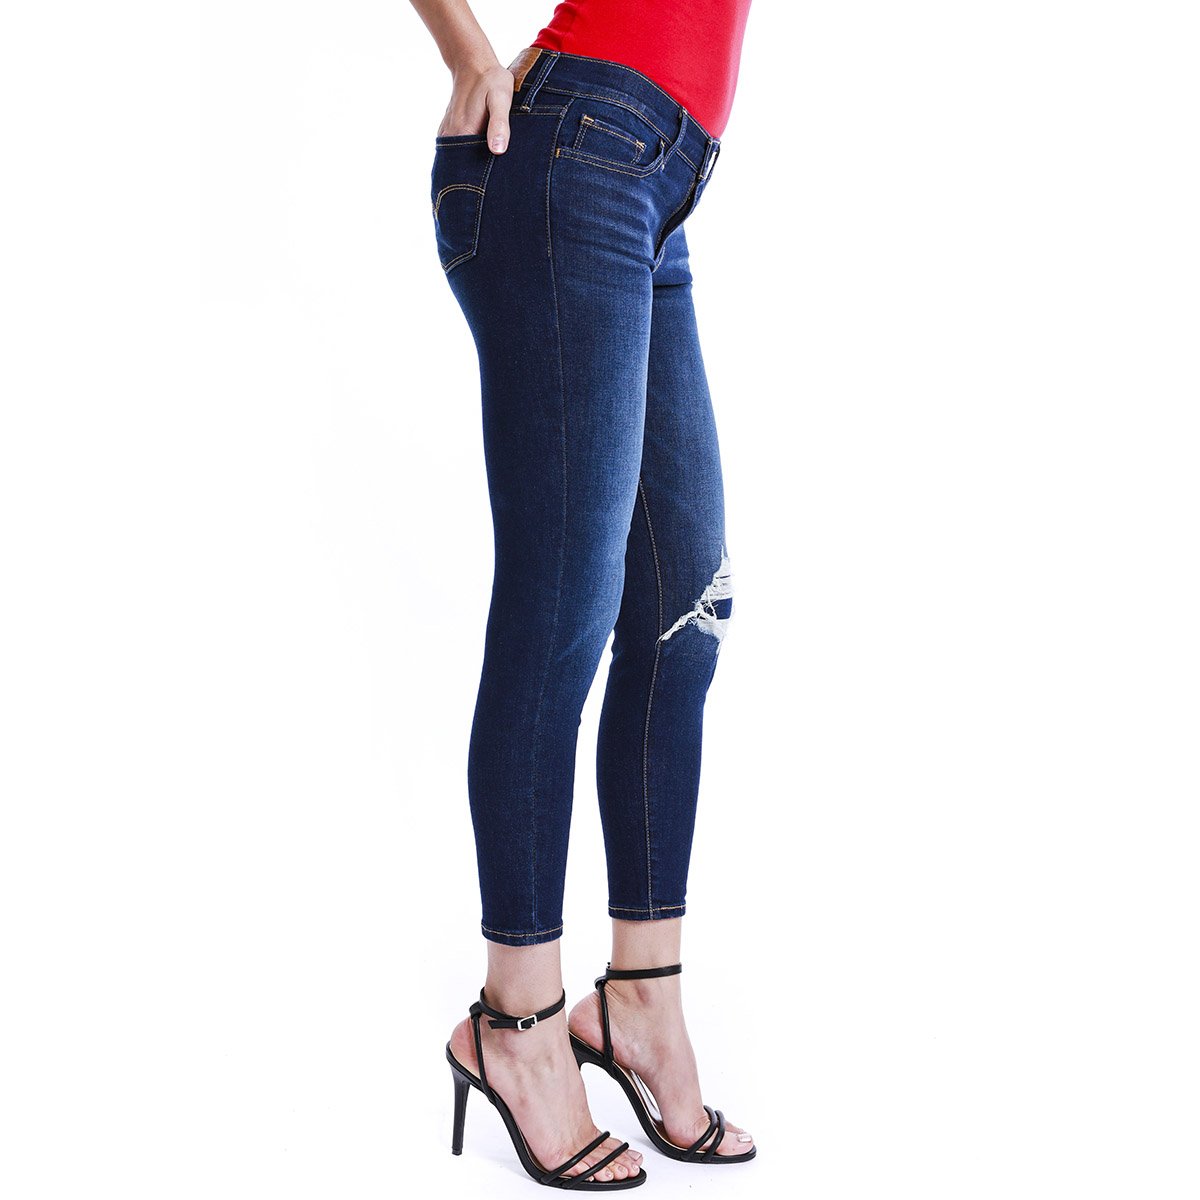 Jeans  710 Super Skinny Cropped  Levis